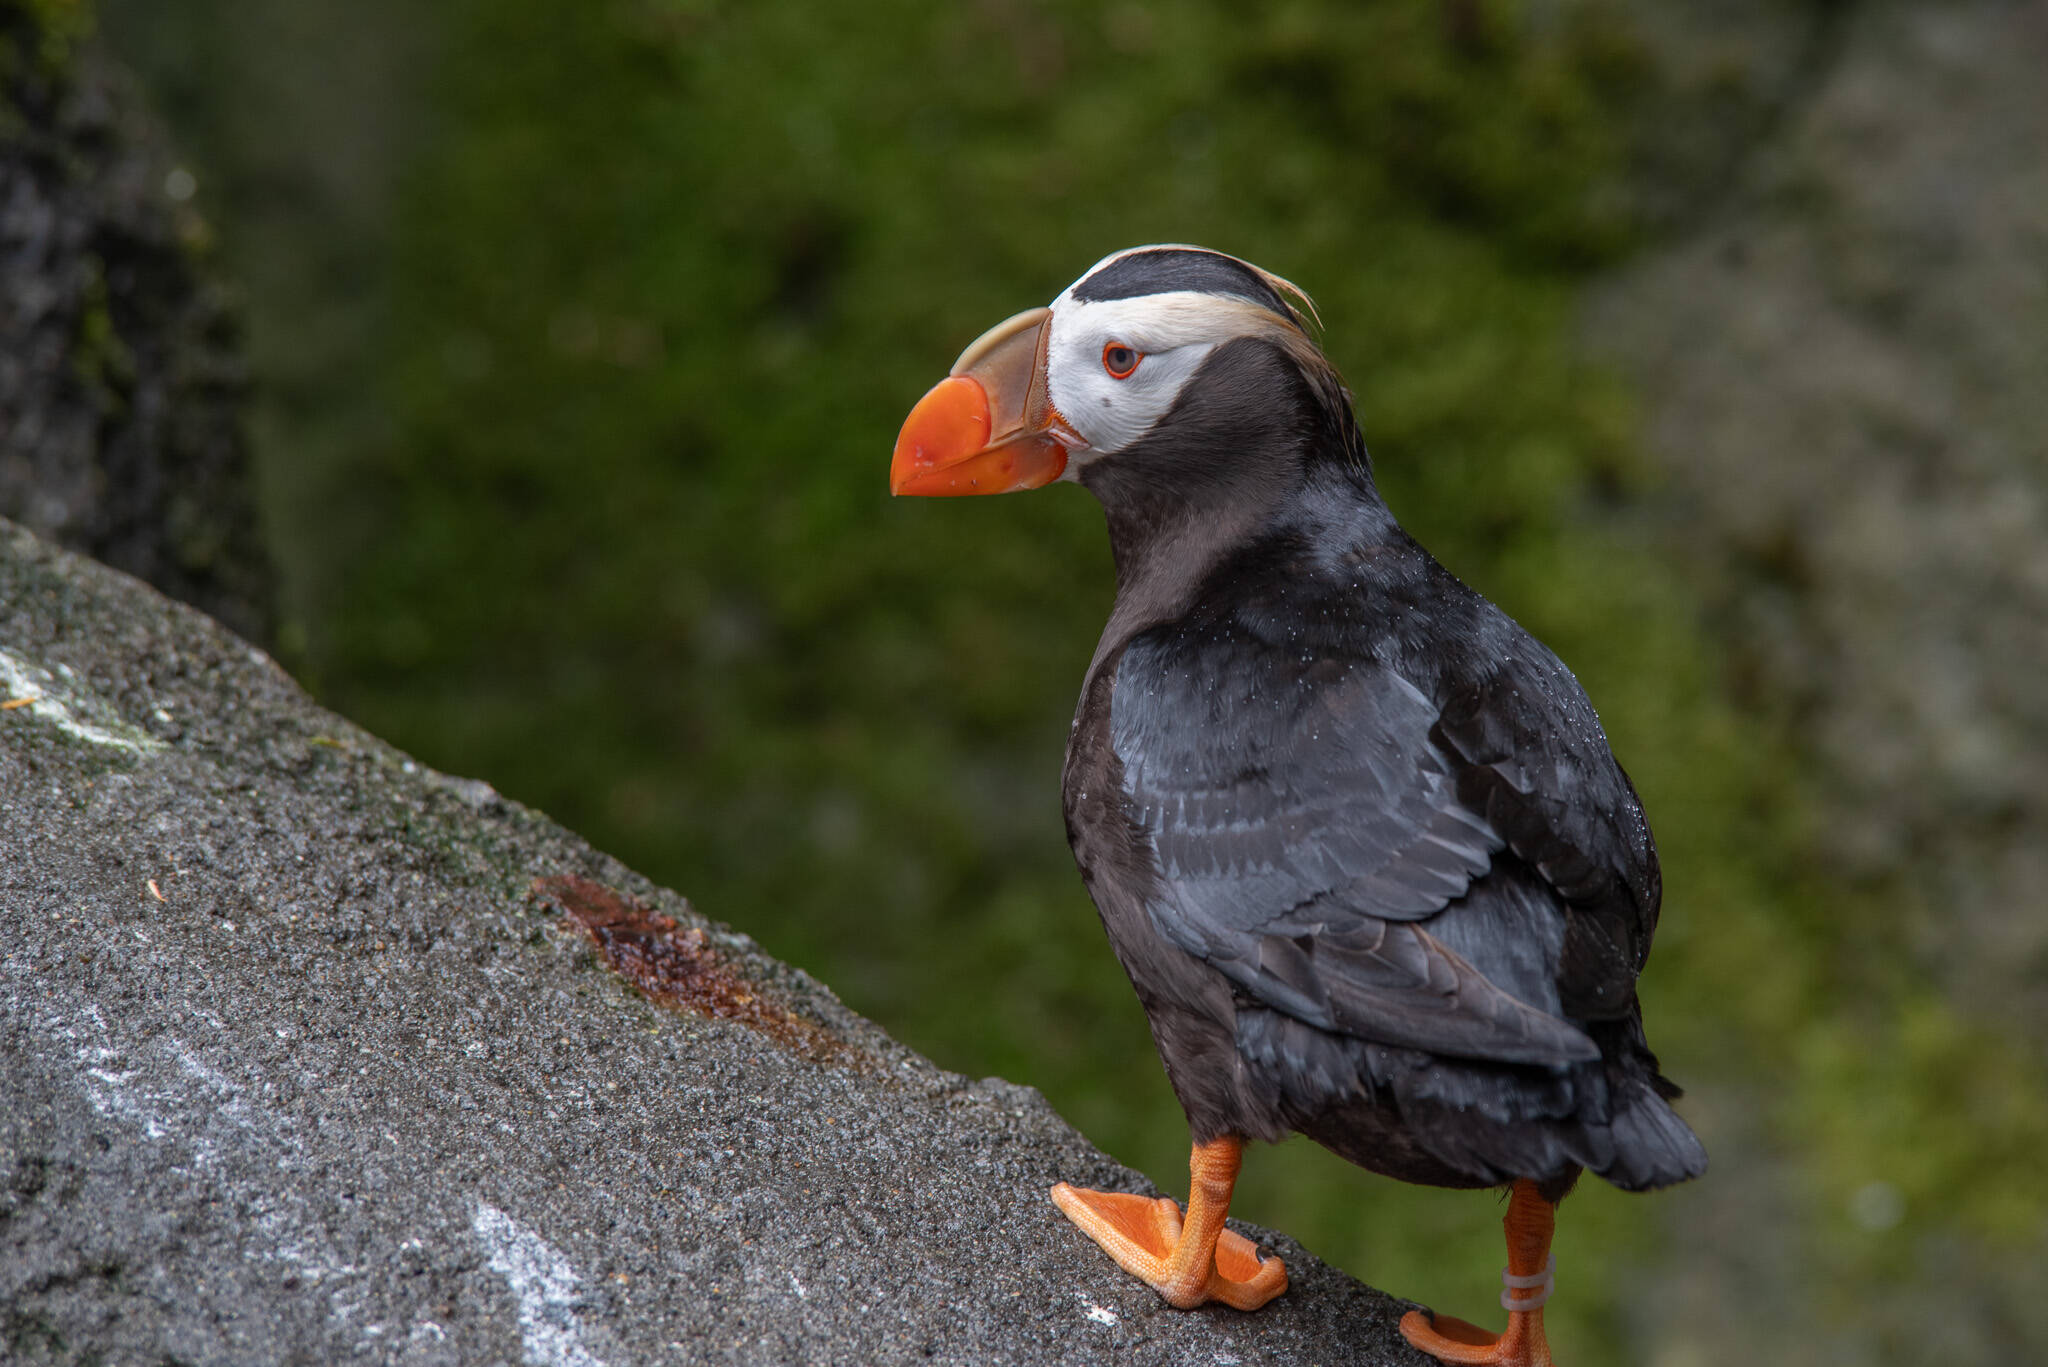 Point Defiance Zoo and Aquarium in Tacoma has a population of 22 tufted puffins, with 7 mated pairs, and successful hatches. Unlike in the wild, where they are very sensitive to human activity, they are adjusted to living their lives under human supervision. The zoo provided burrows for them, but Noelle Tremonti, staff biologist and zookeeper at the Rocky Shores area said that they have been digging some of their own also. “All the animals are encouraged to have natural behaviors,” she said. If the tufted puffins breed successfully in confinement, would a solution to their declining population be to release them into the wild? No, say experts in Puffin decline, because it doesn’t address the core environmental issues affecting the decline. “While reintroduction is mentioned in the state’s puffin recovery plan, it is not the primary focus and most of the work is on improving puffin habitat in the wild,” wrote the zoo’s general curator, Malia Somerville.